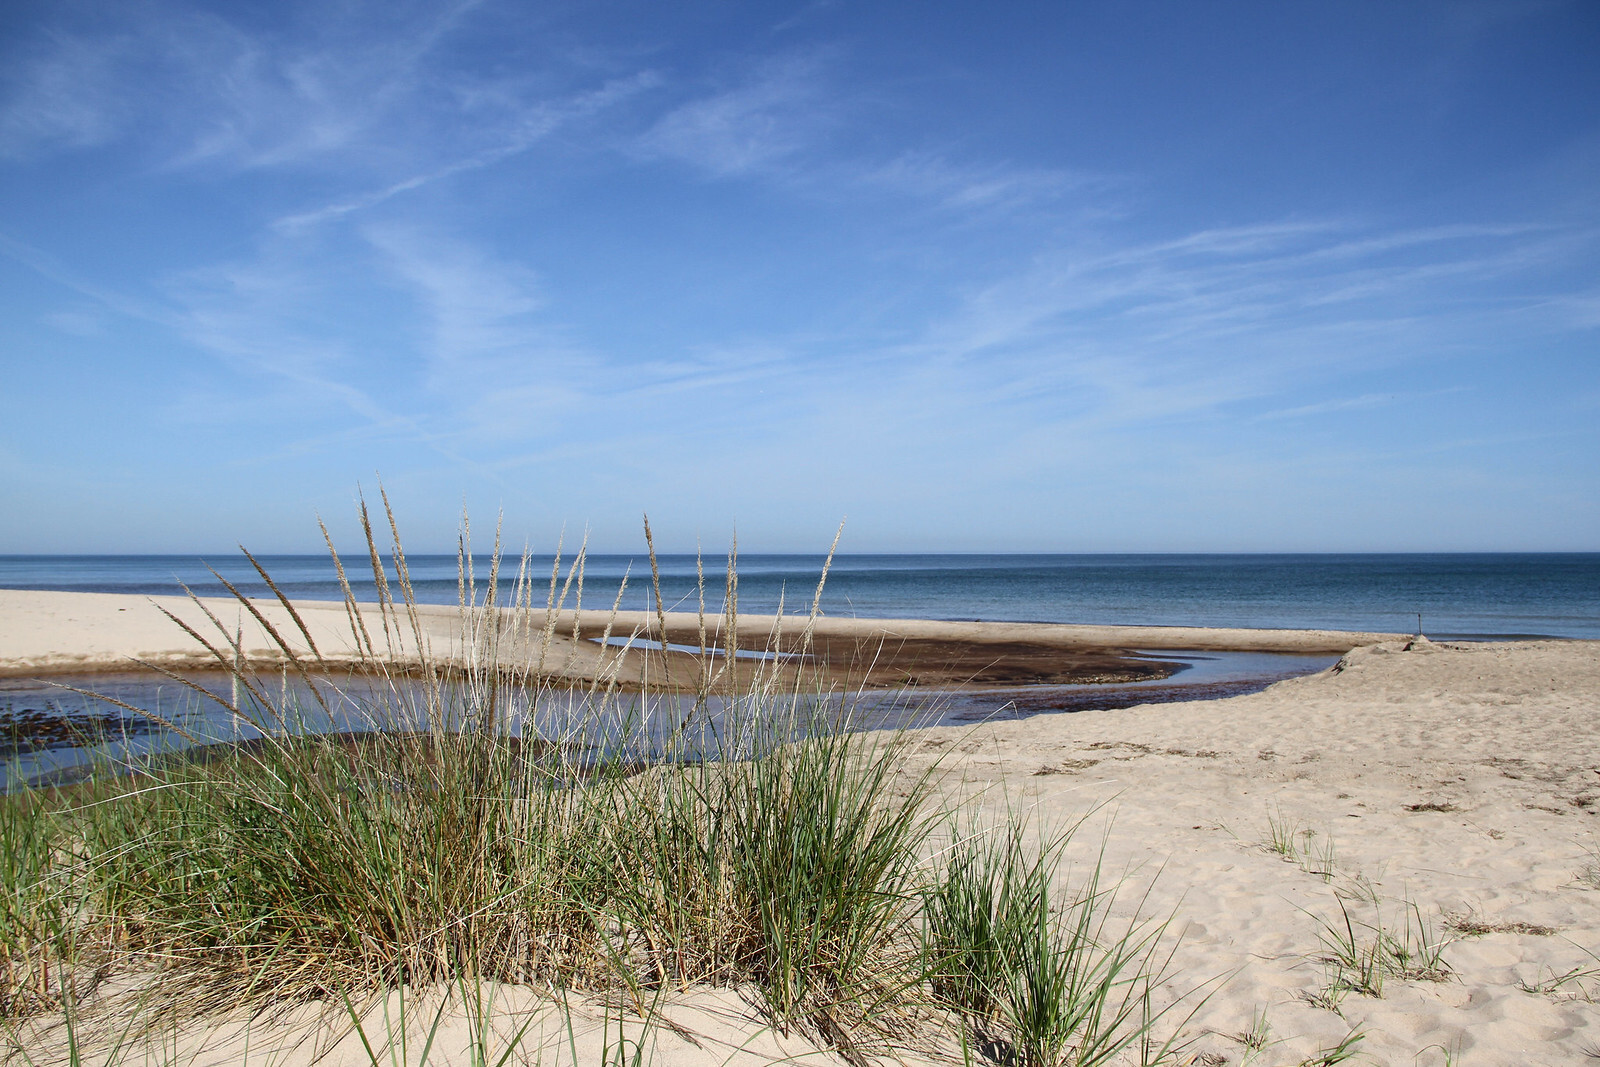 Image showing patch of marram grass at Indiana Dunes beach.